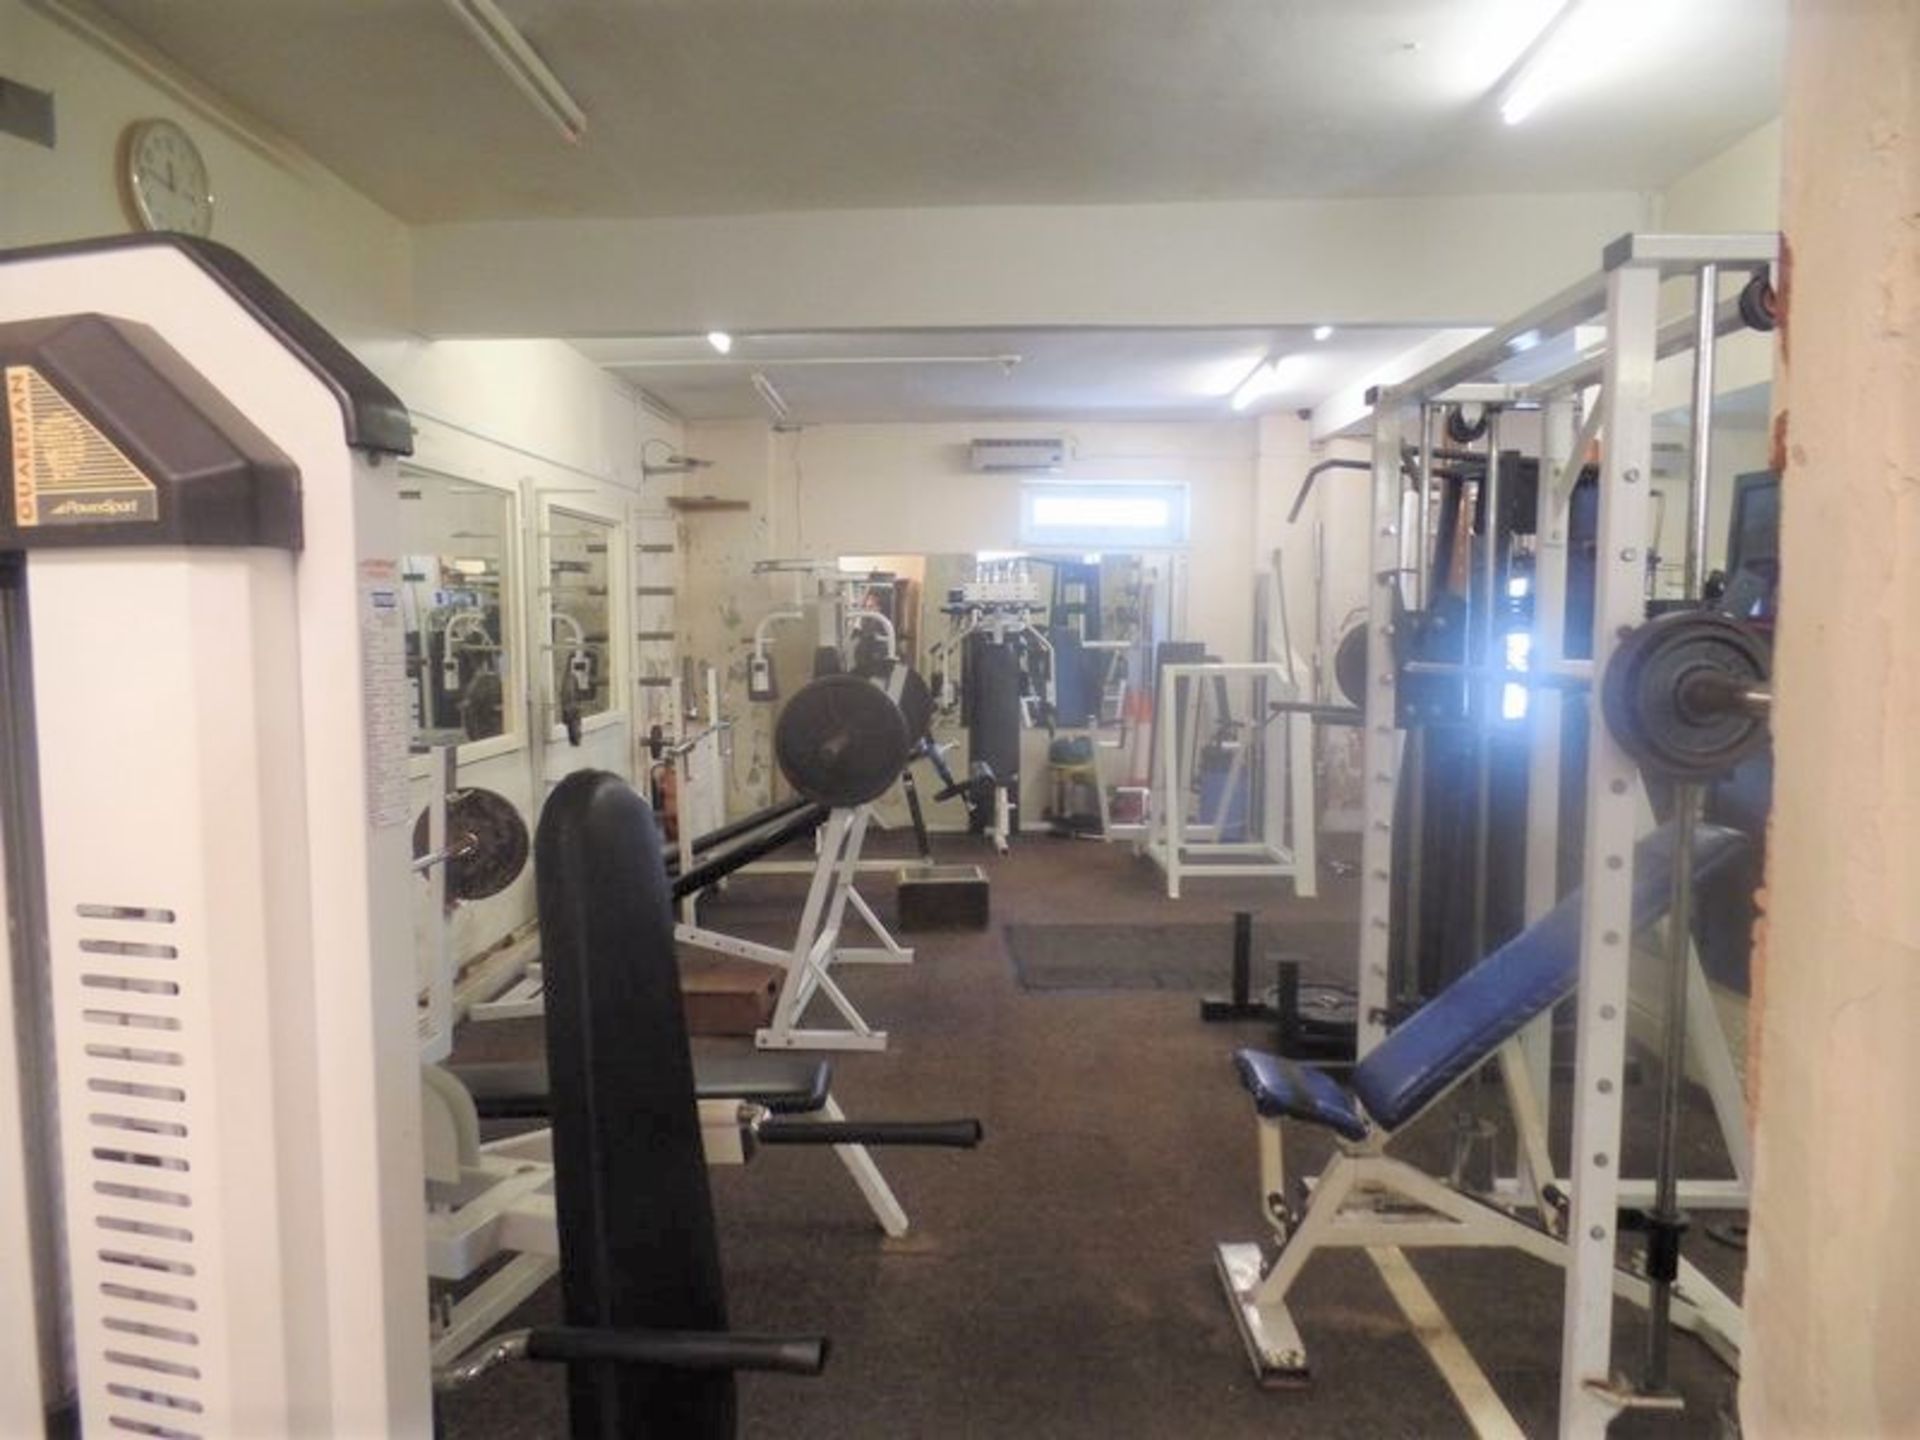 Contents of Bodybuilding and Strongman Gym - Includes Approx 30 Pieces of Gym Equipment, Floor Mats,